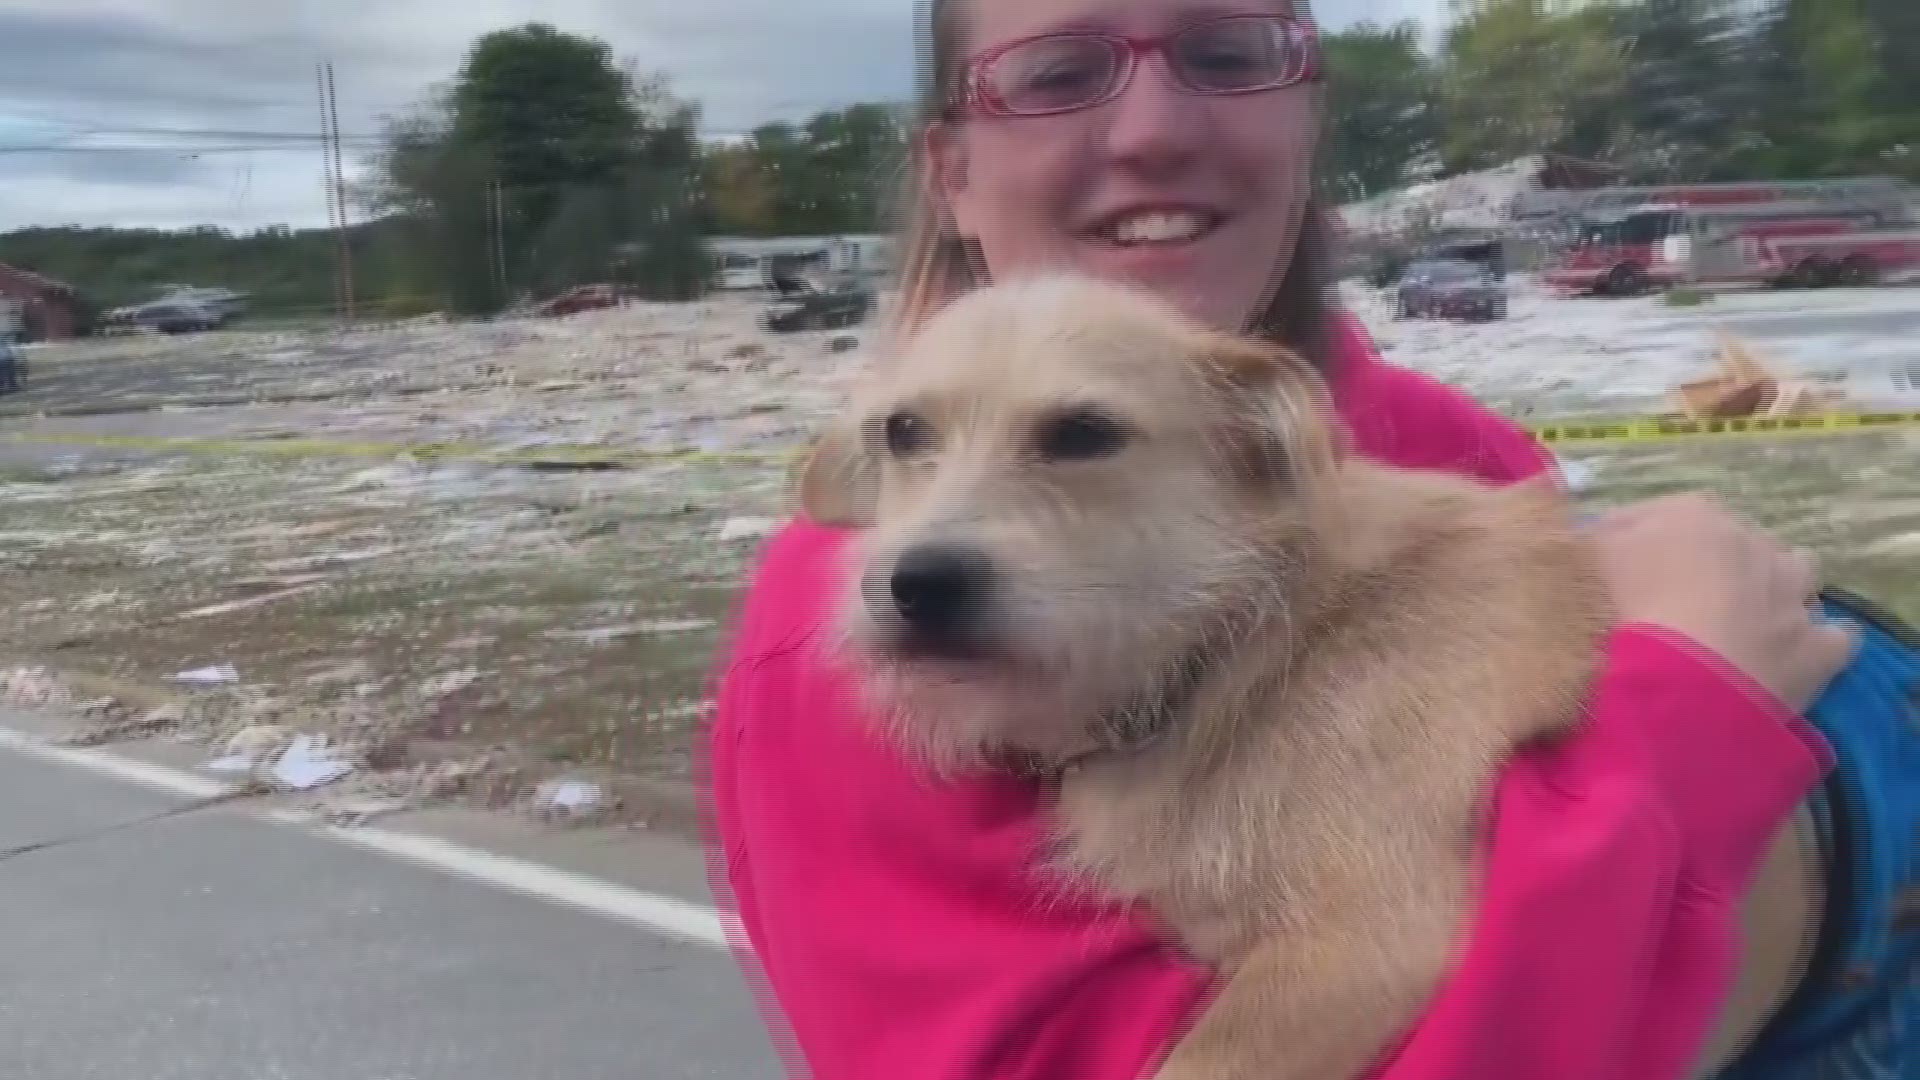 Jaime Green who lived behind LEAP Inc., finds one of her lost pets after Farmington explosion